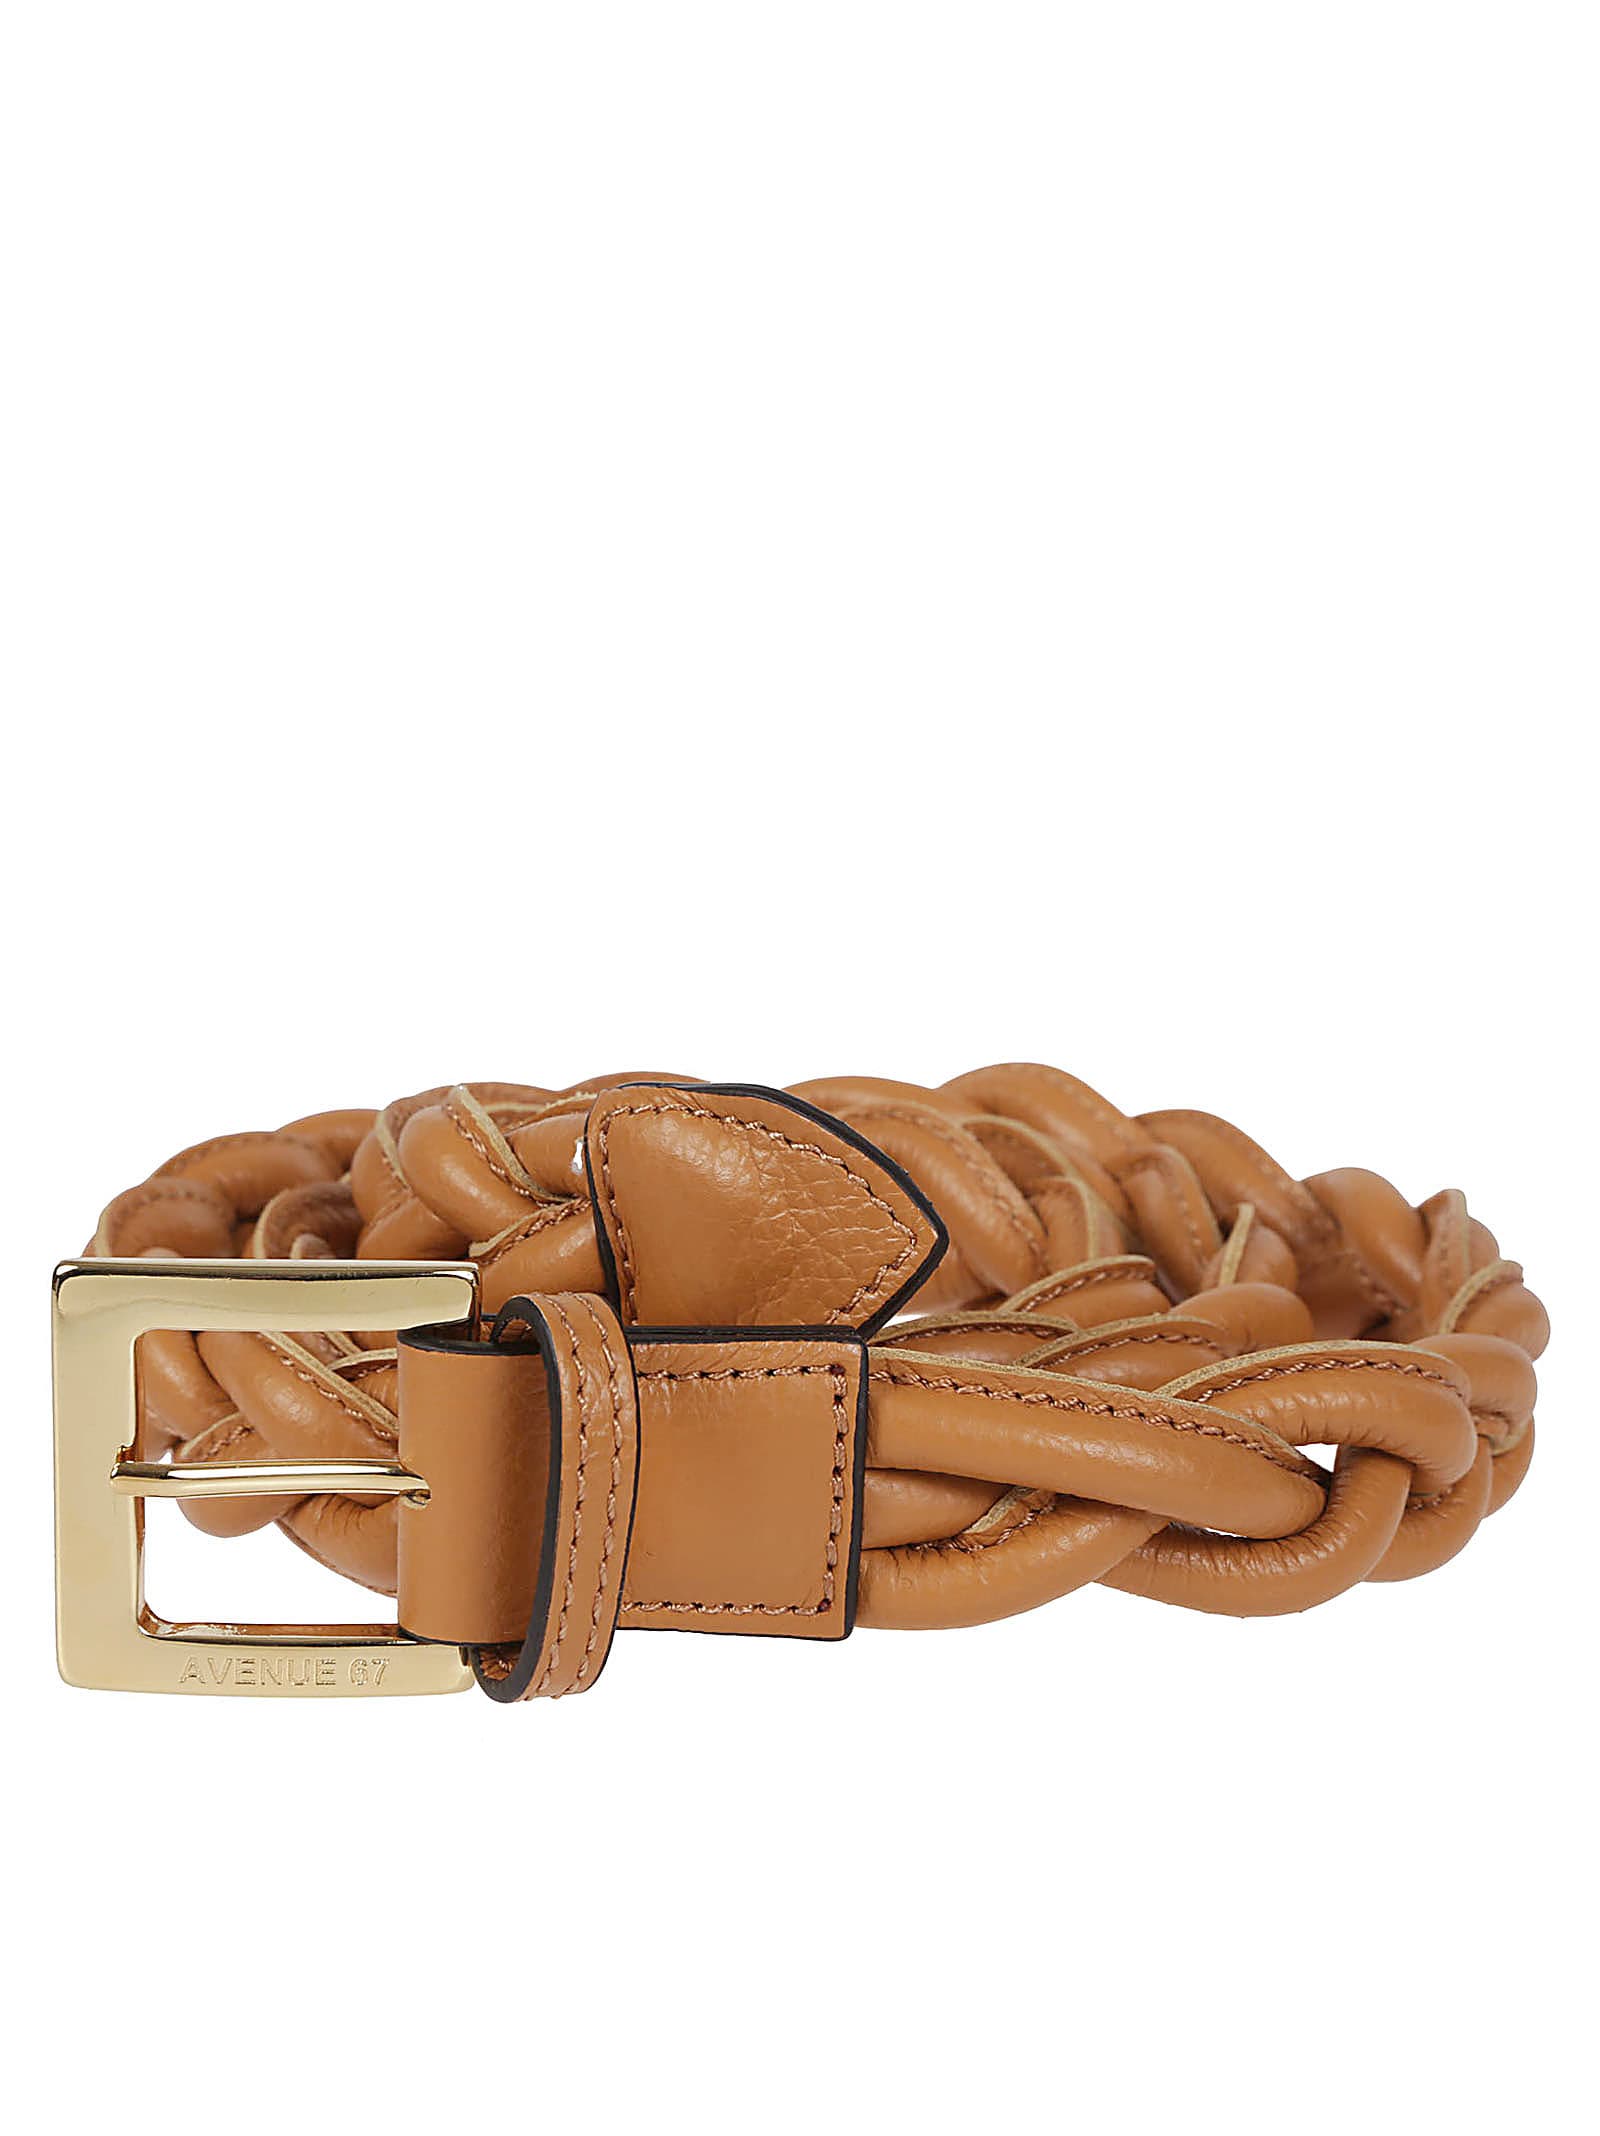 Avenue67 Belts Leather Brown